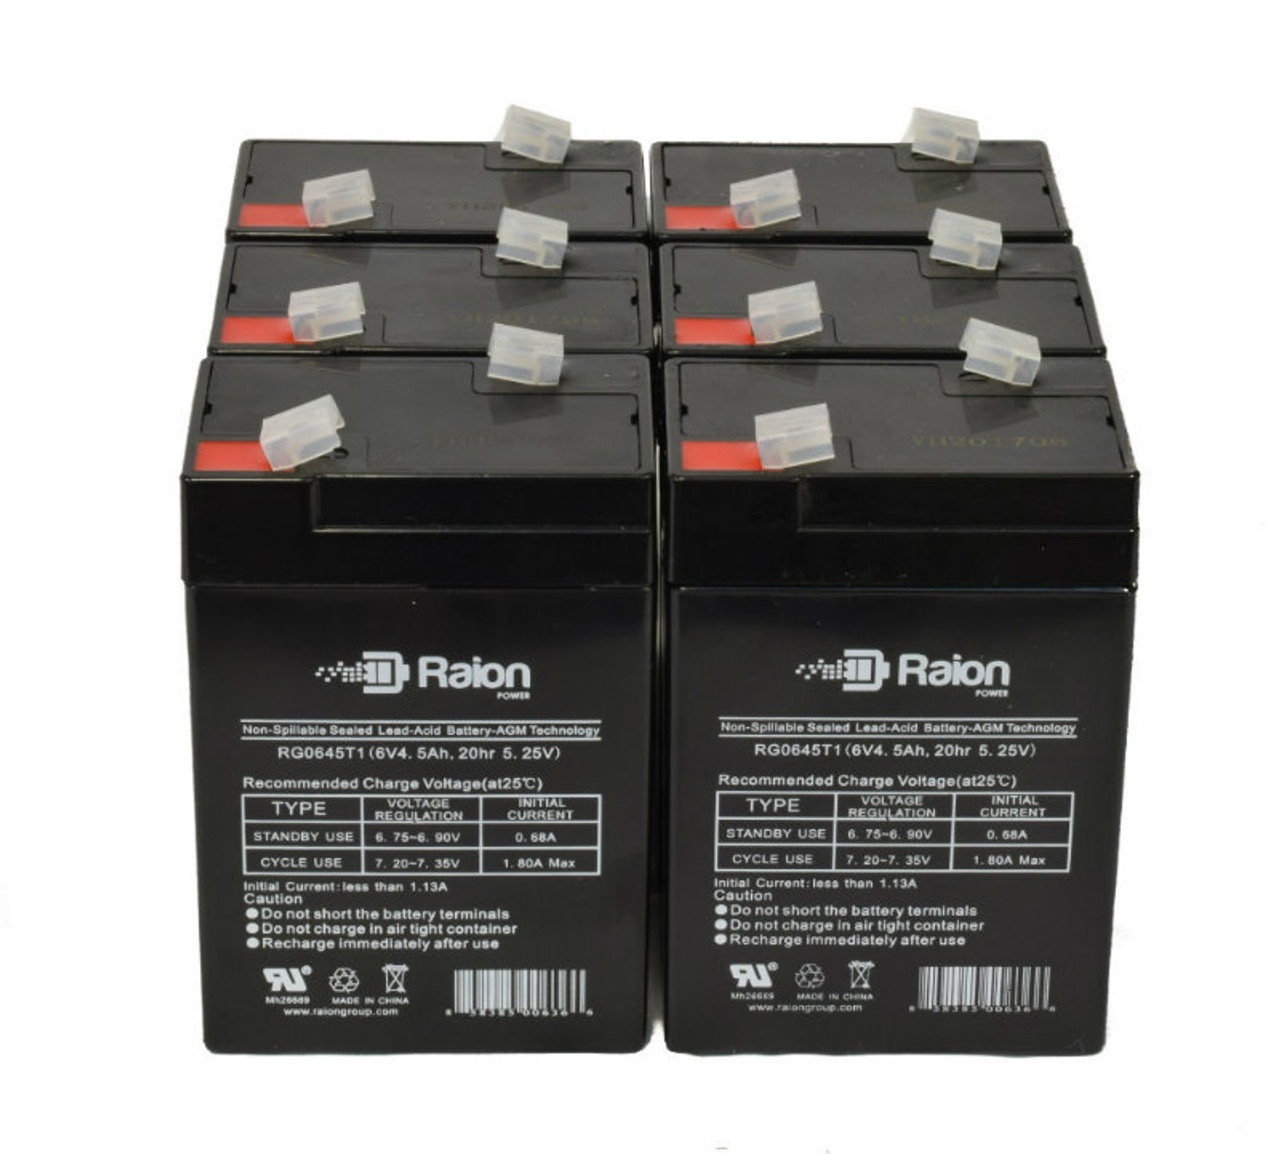 Raion Power 6 Volt 4.5Ah RG0645T1 Replacement Battery for Weida HX6-4.5H - 6 Pack